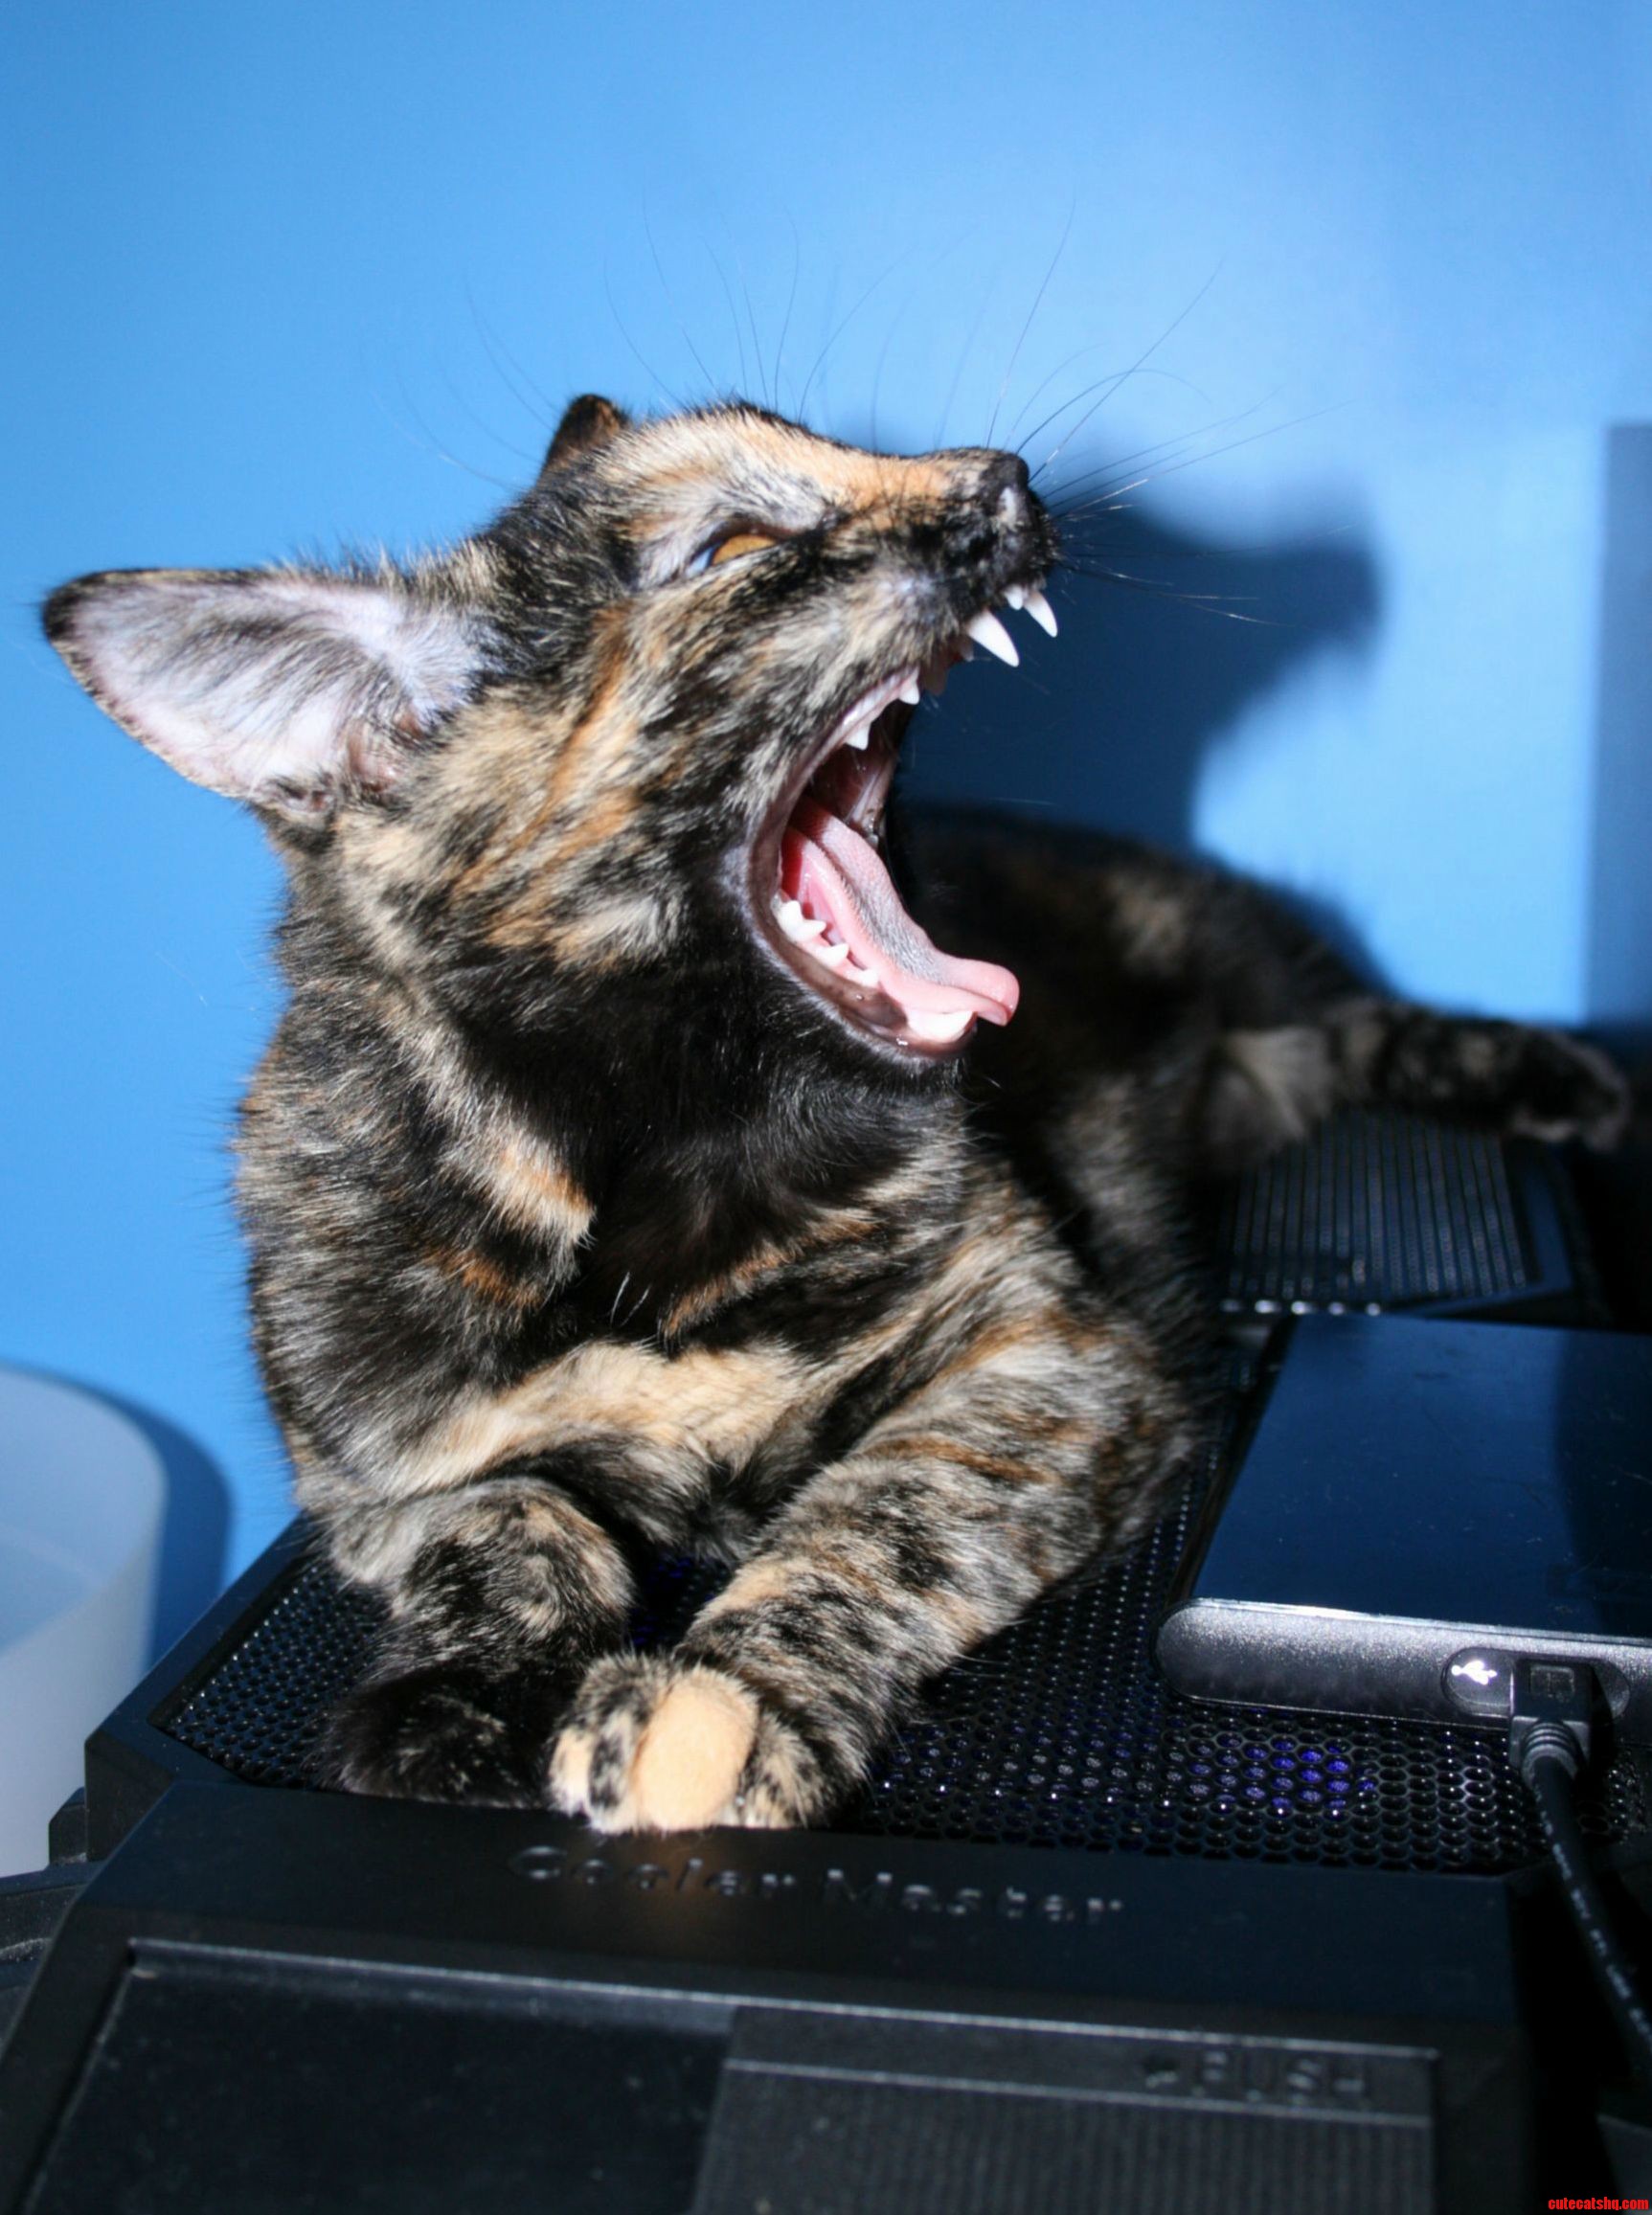 Such A Big Yawn For Such A Small Cat.